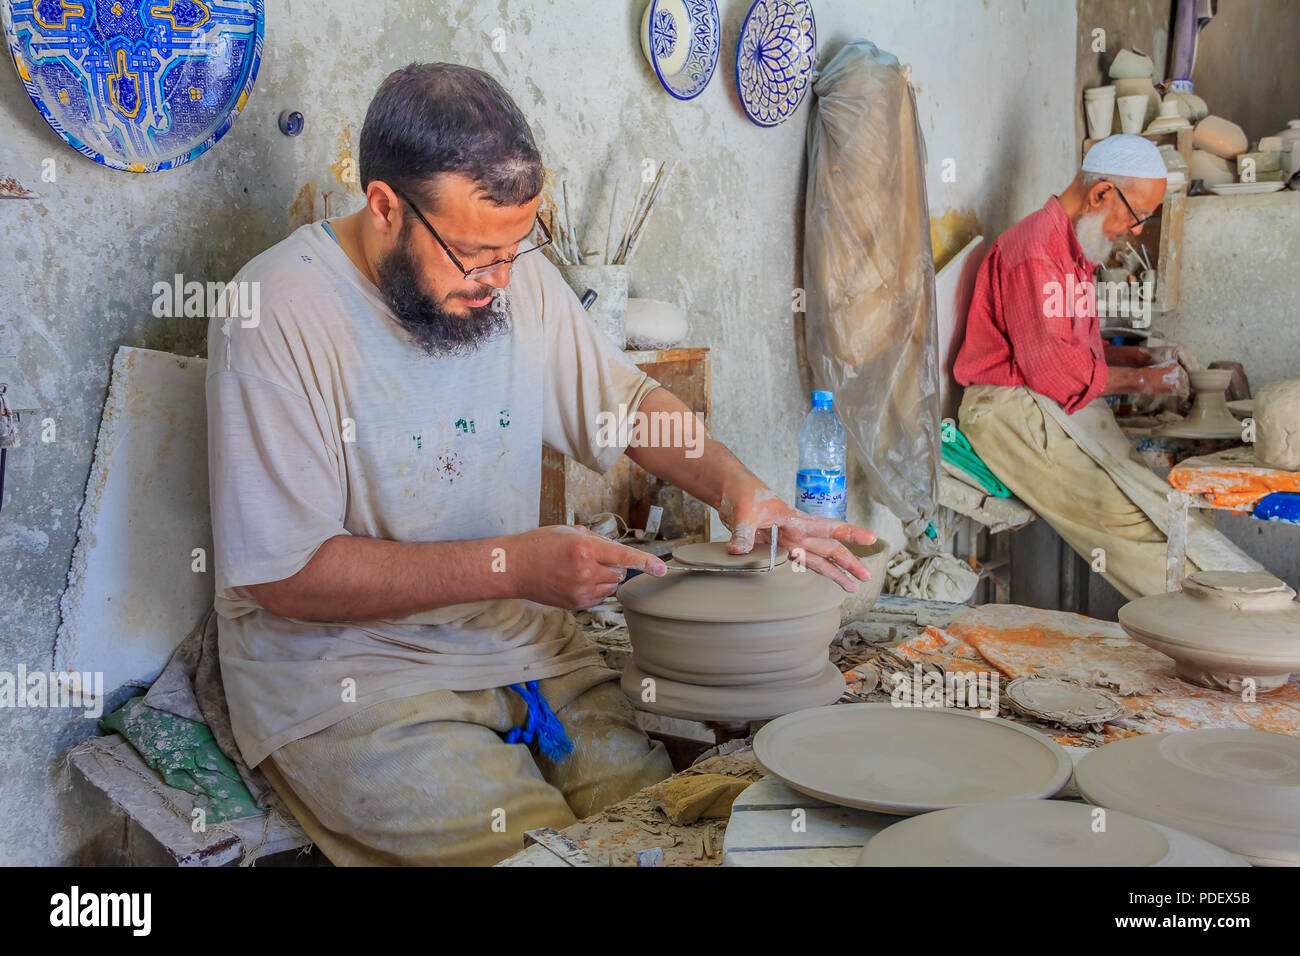 Fes, Morocco - May 11, 2013: Moroccan potter at work in a pottery shop Stock Photo